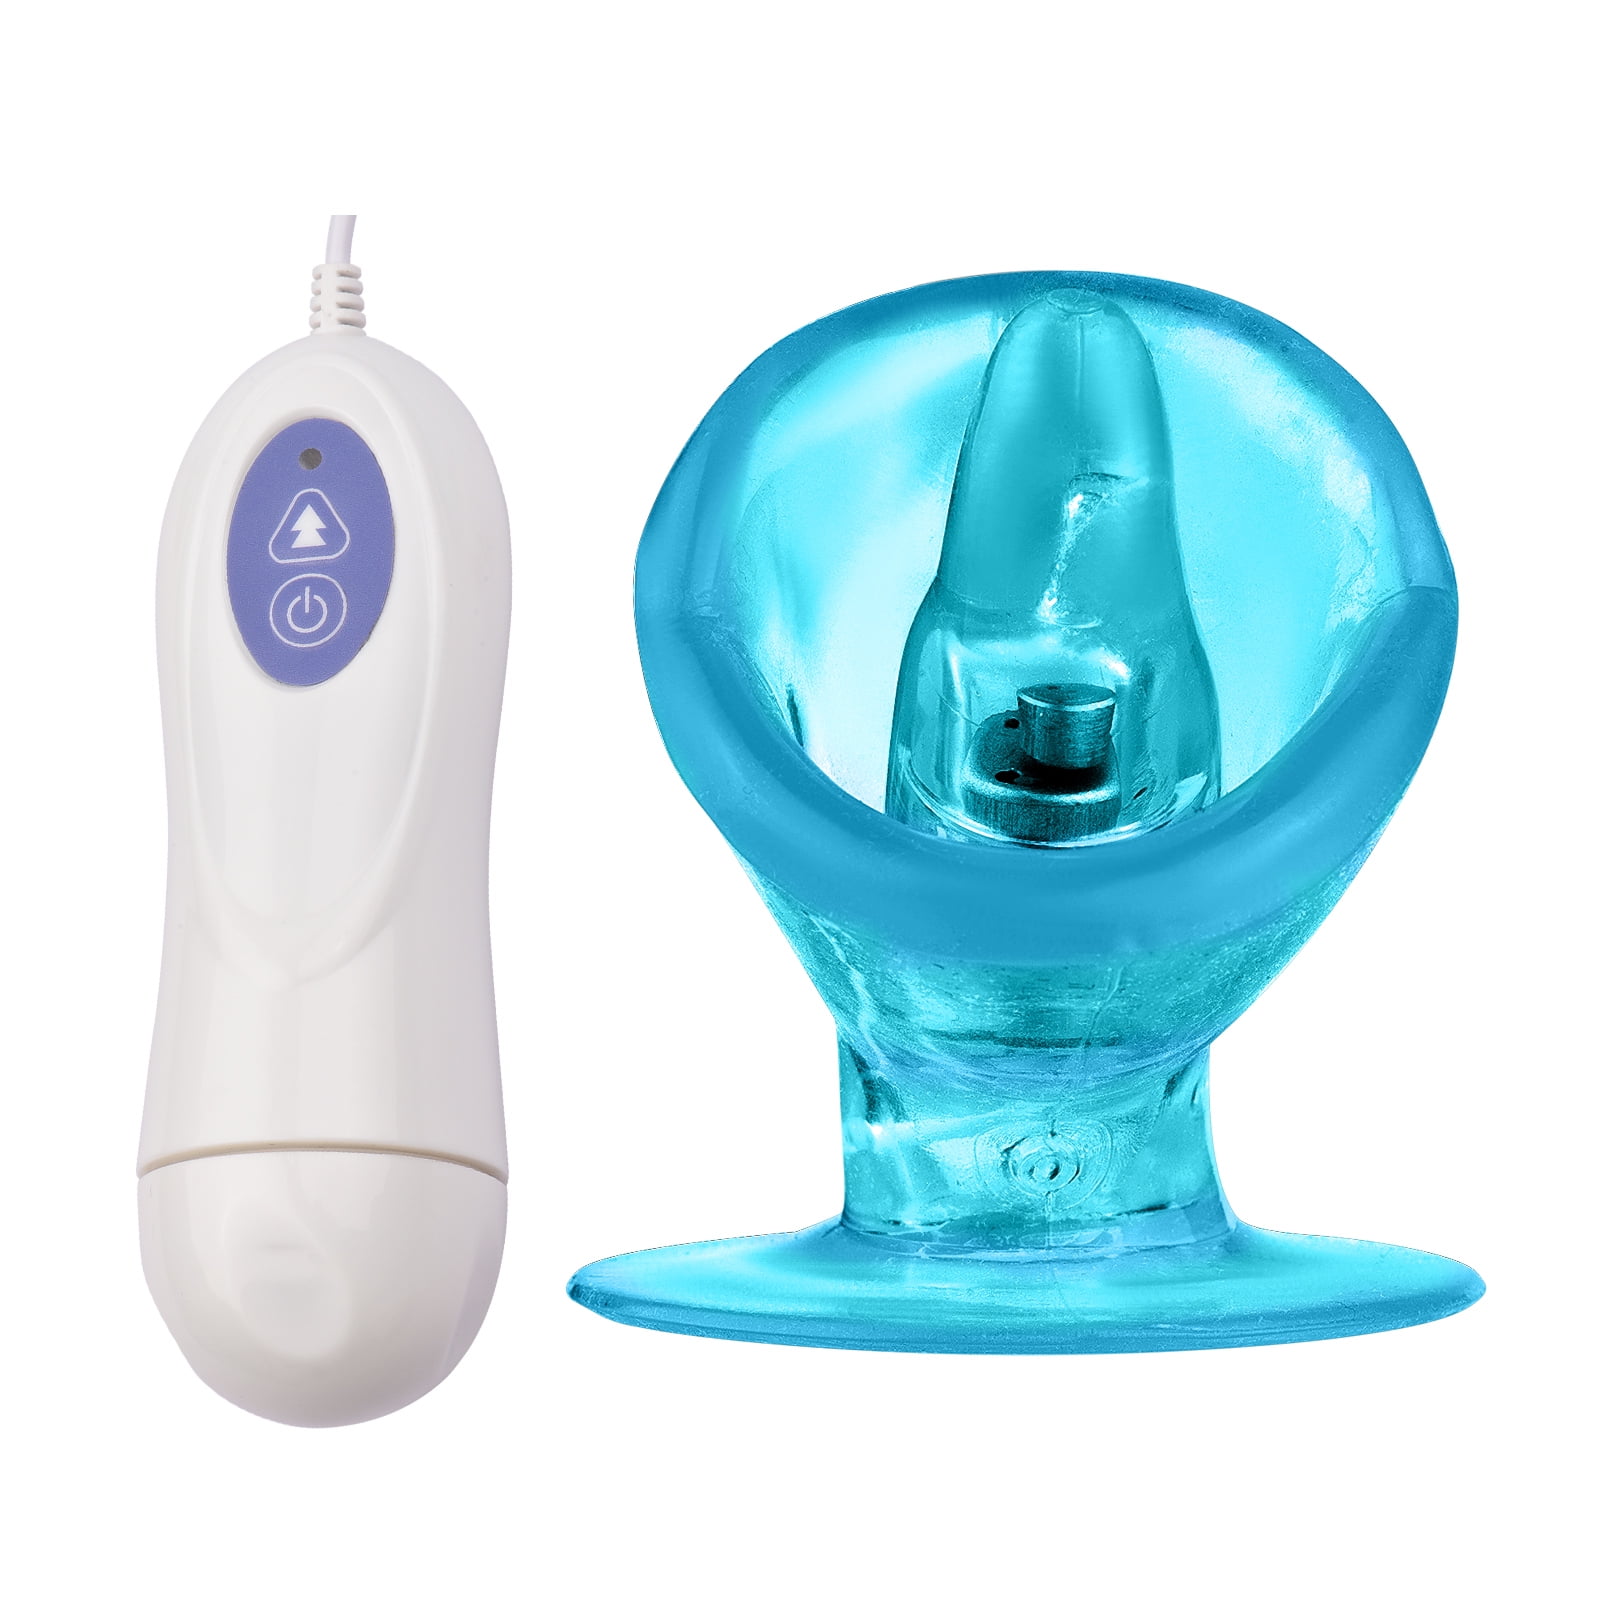 Adult Sex Toy For Woman